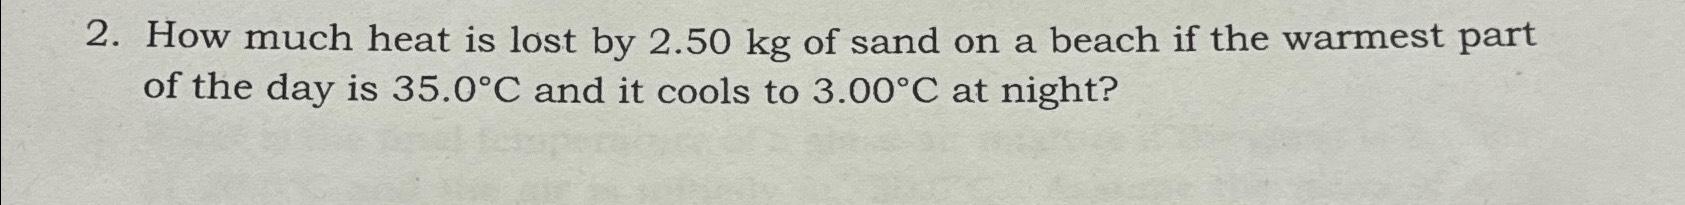 2. How much heat is lost by 2.50 kg of sand on a beach if the warmest part of the day is 35.0C and it cools